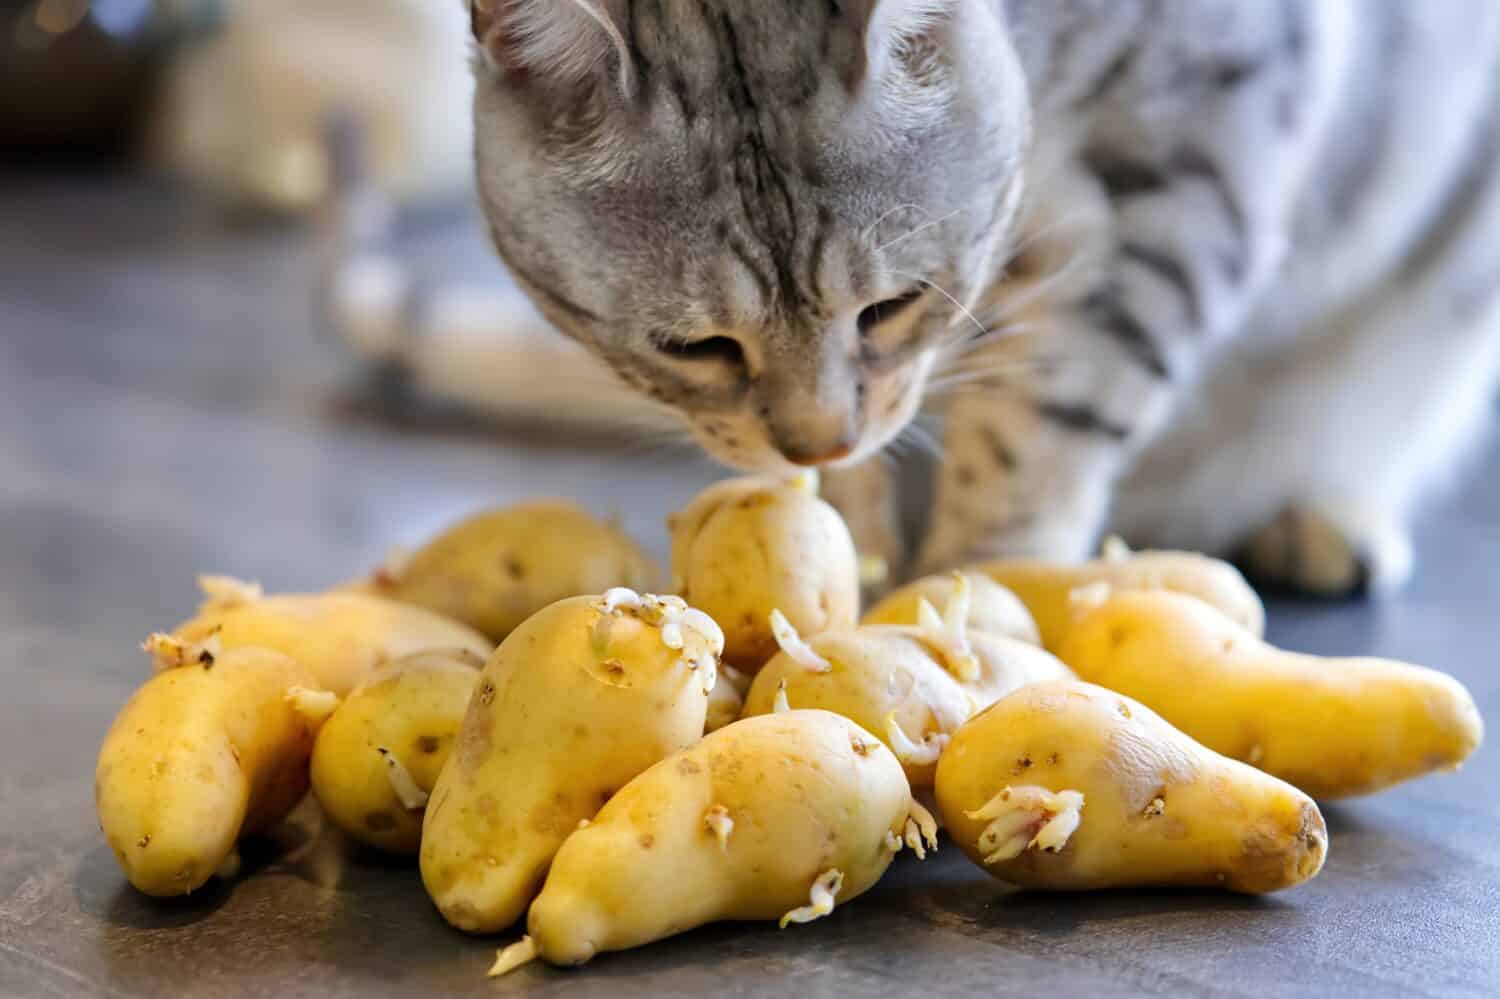 Bengal cat sits next to sprouted potatoes. Cat sniffs raw potatoes. Close up